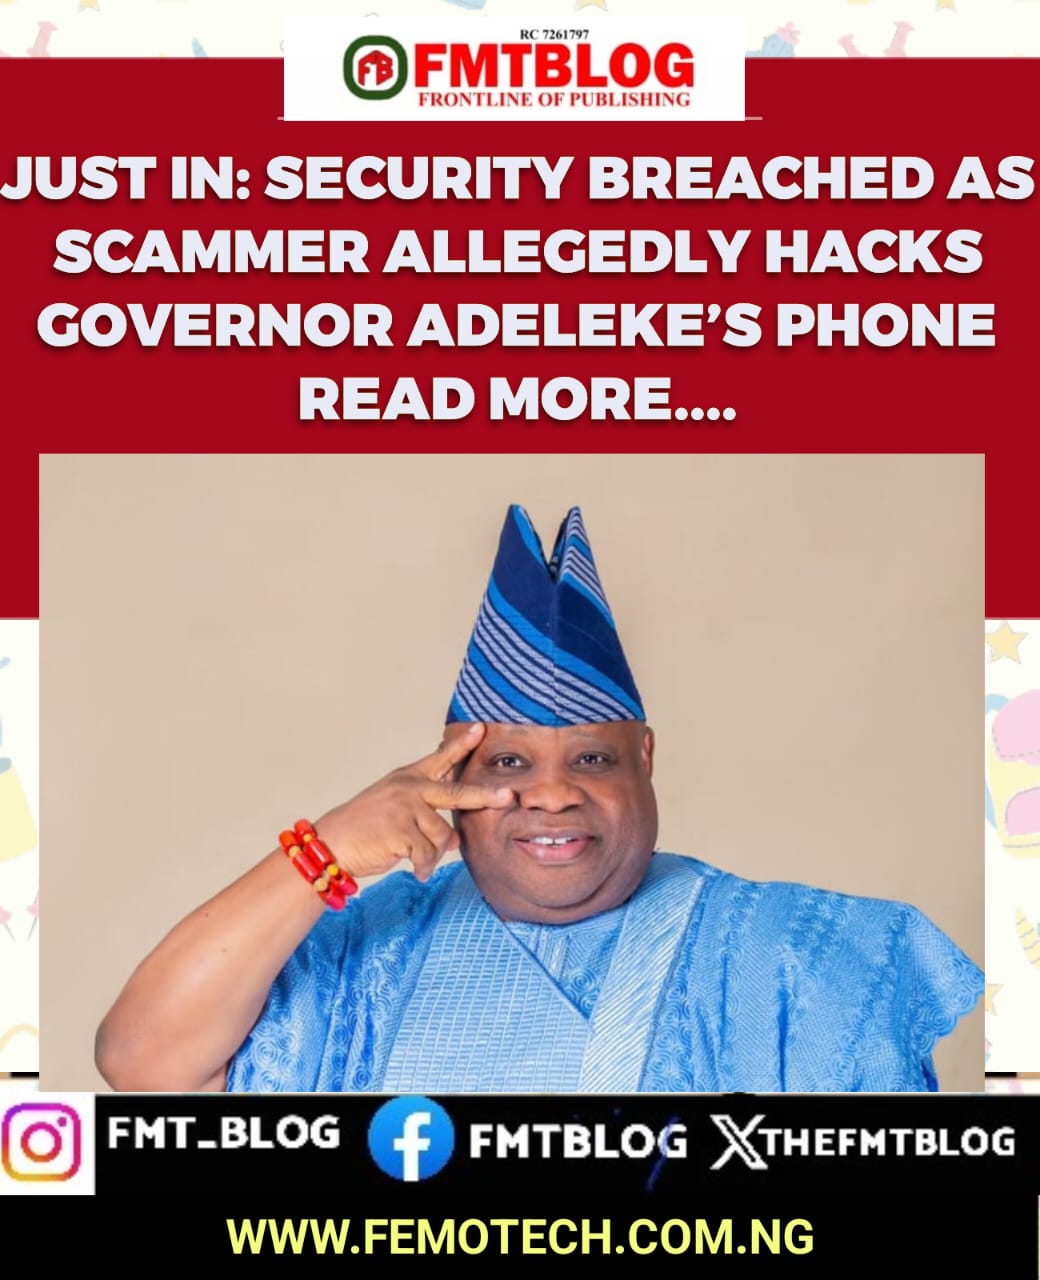 JUST IN: Security Breached As Scammer Allegedly Hacks Governor Adeleke’s Phone